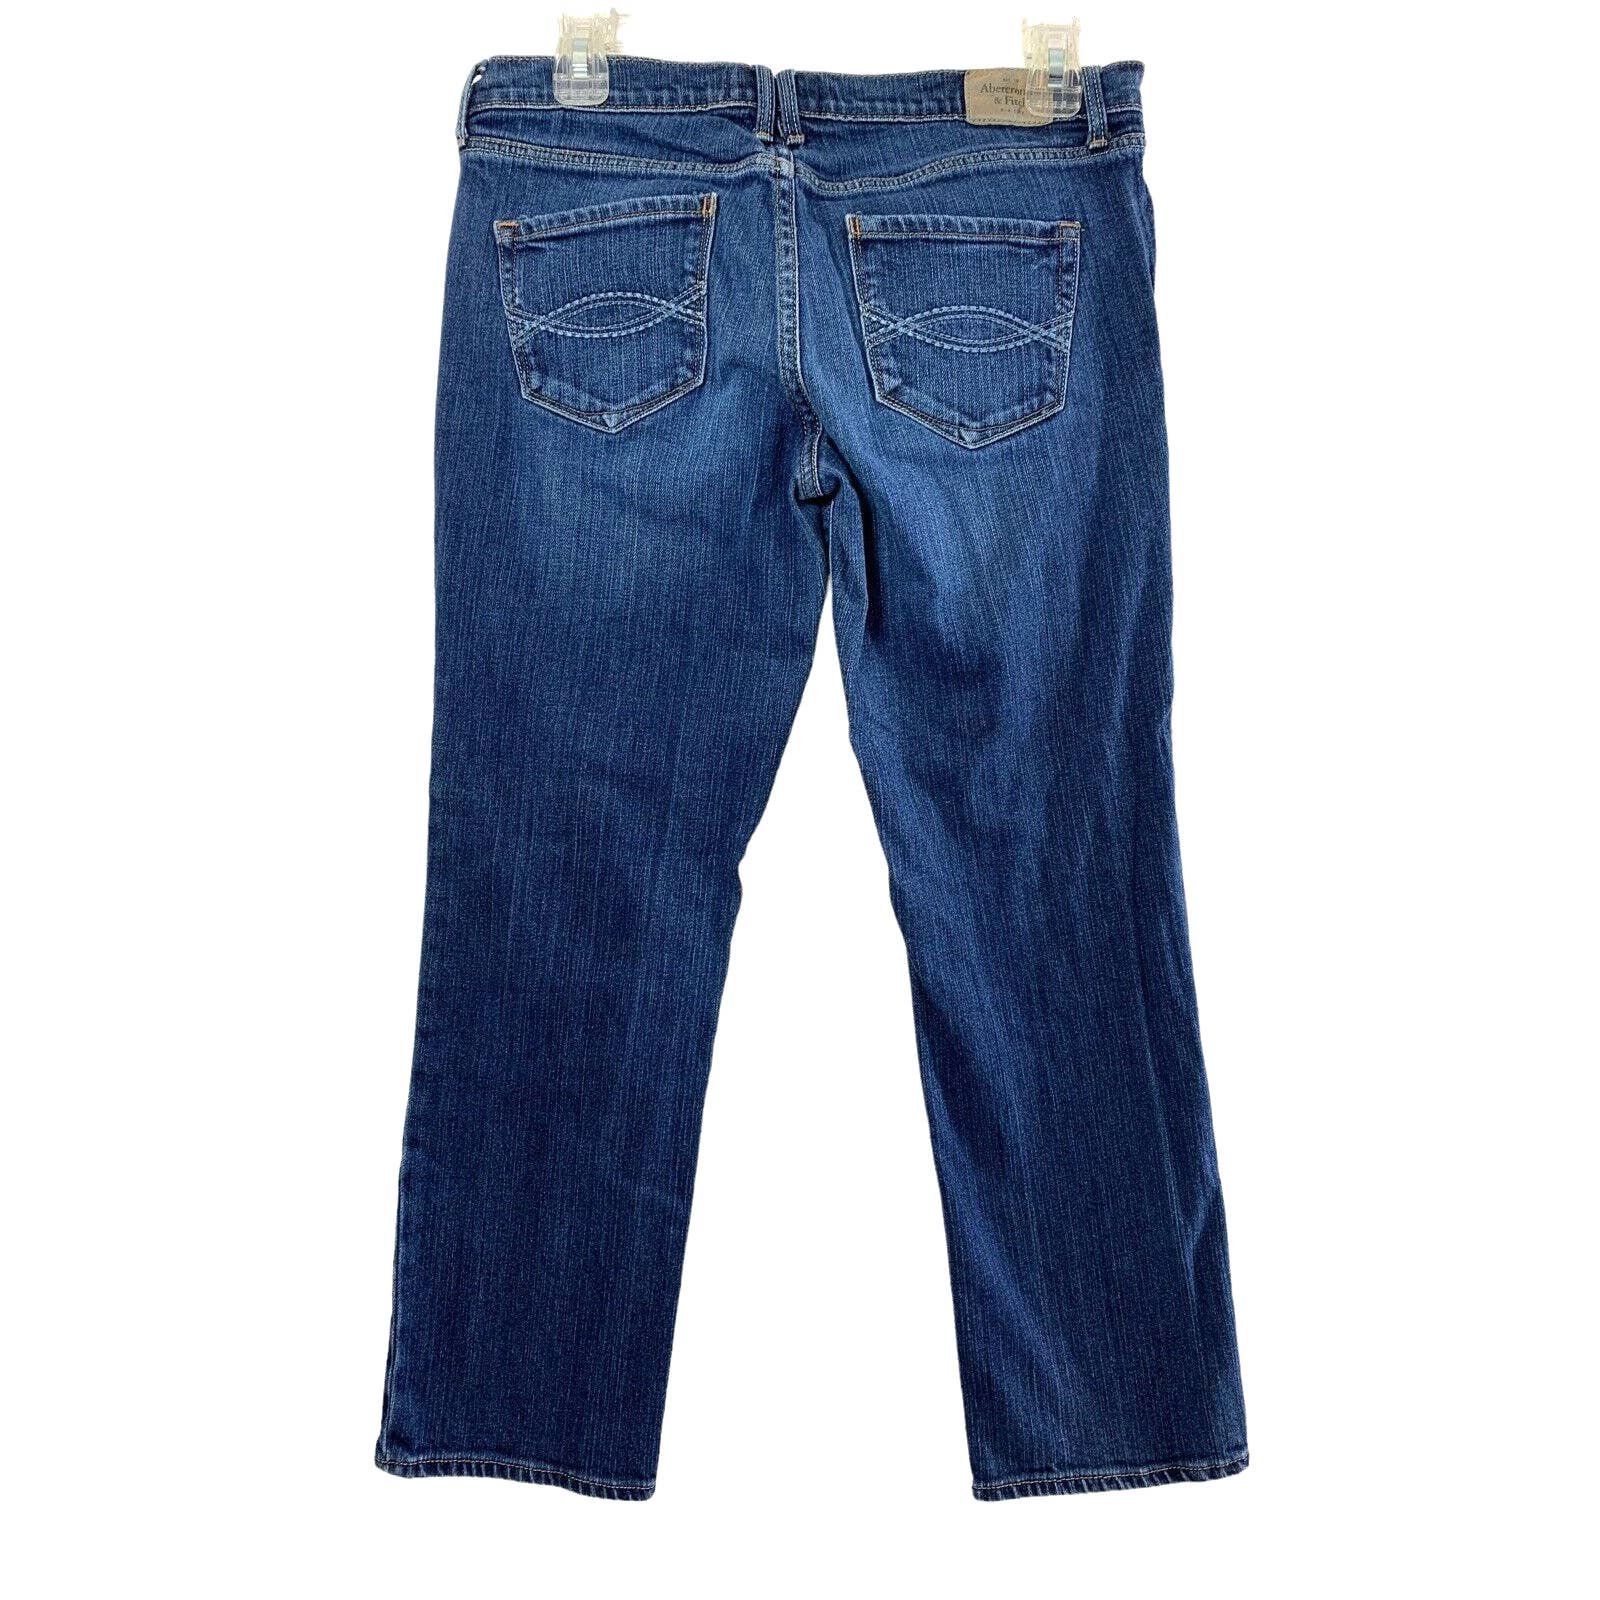 reasonable price Abercrombie & Fitch Jeans Womens 8 Straight Medium Wash Denim Low Rise HYFx0i4z5 Hot Sale